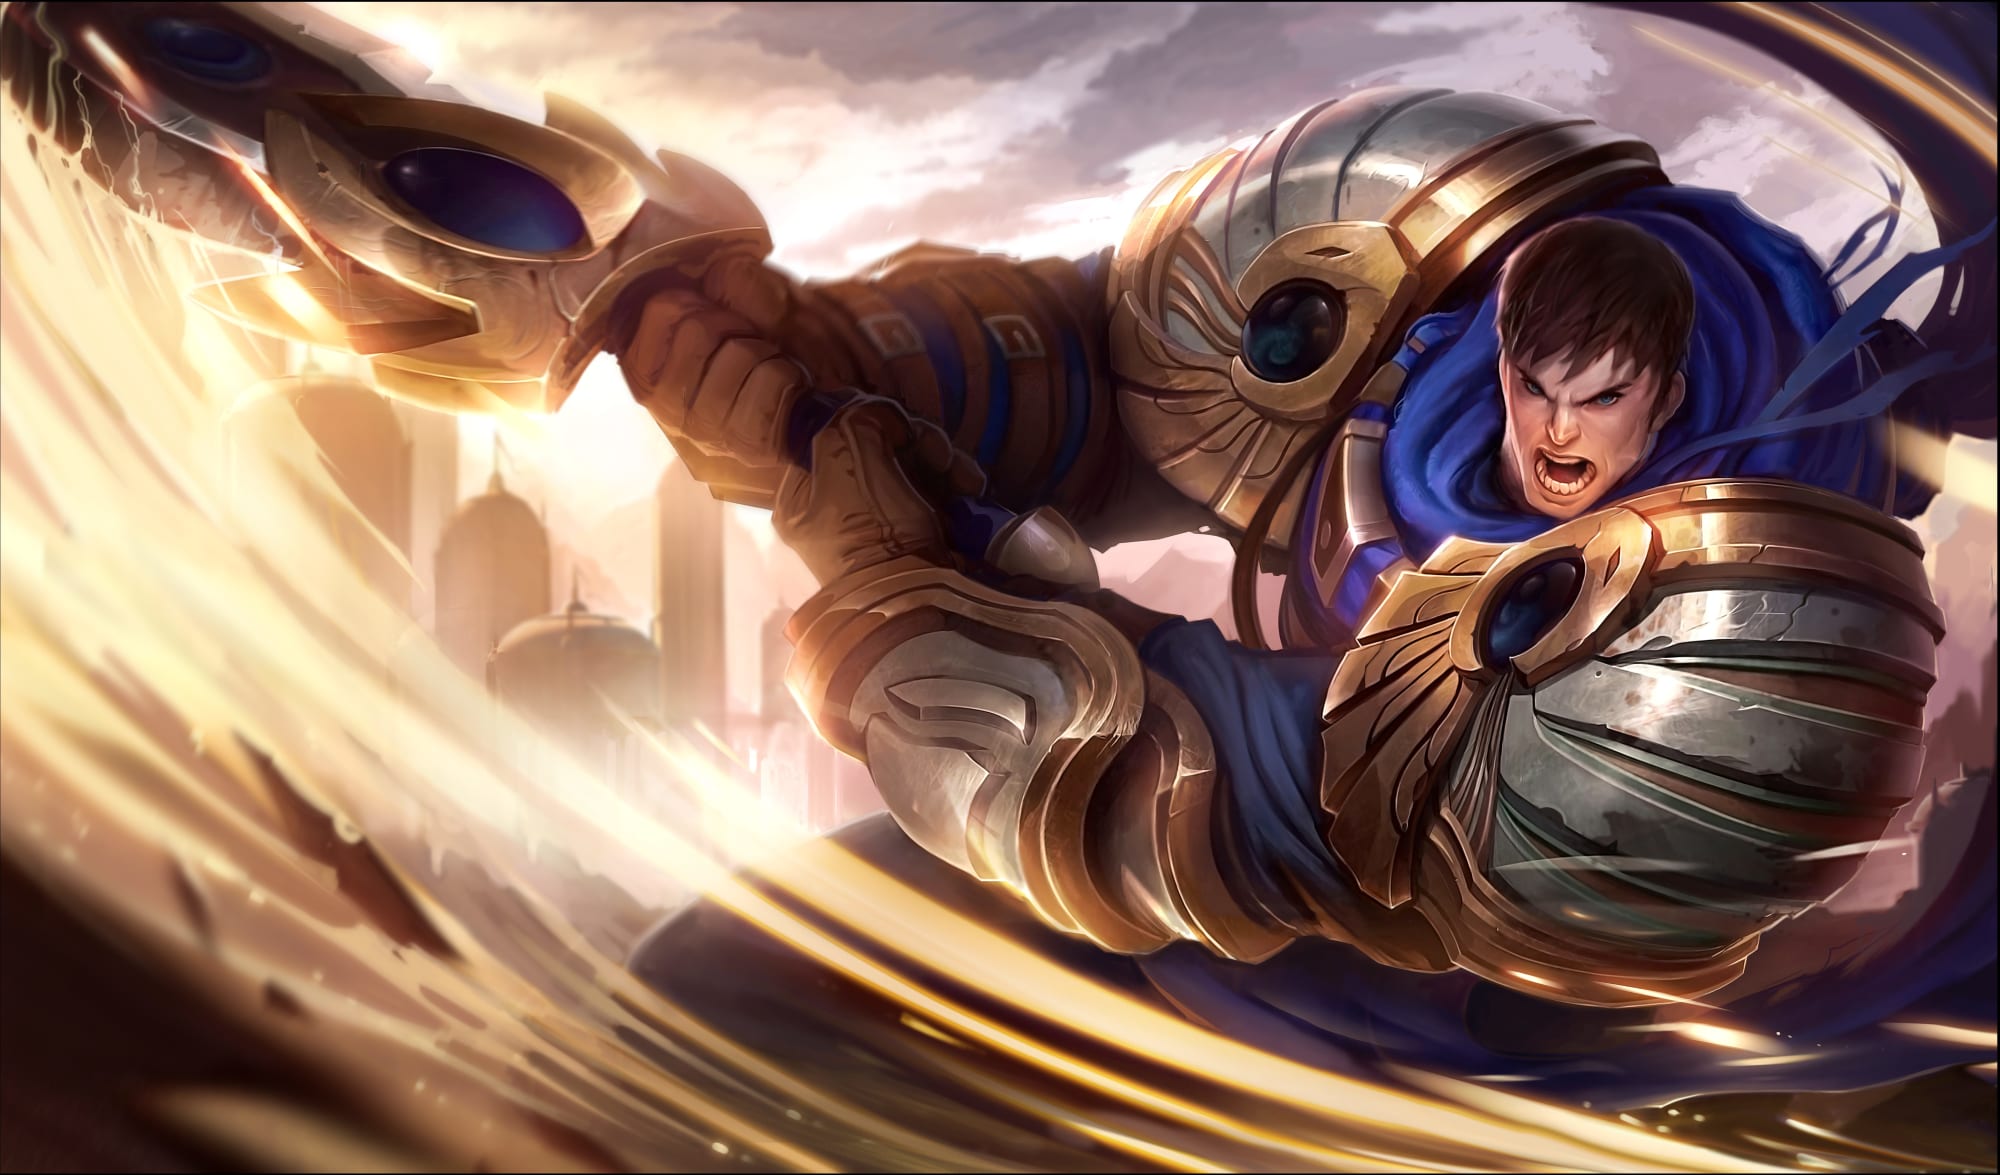 Hård ring Hælde gys League of Legends: Recasting Game of Thrones with LoL champions